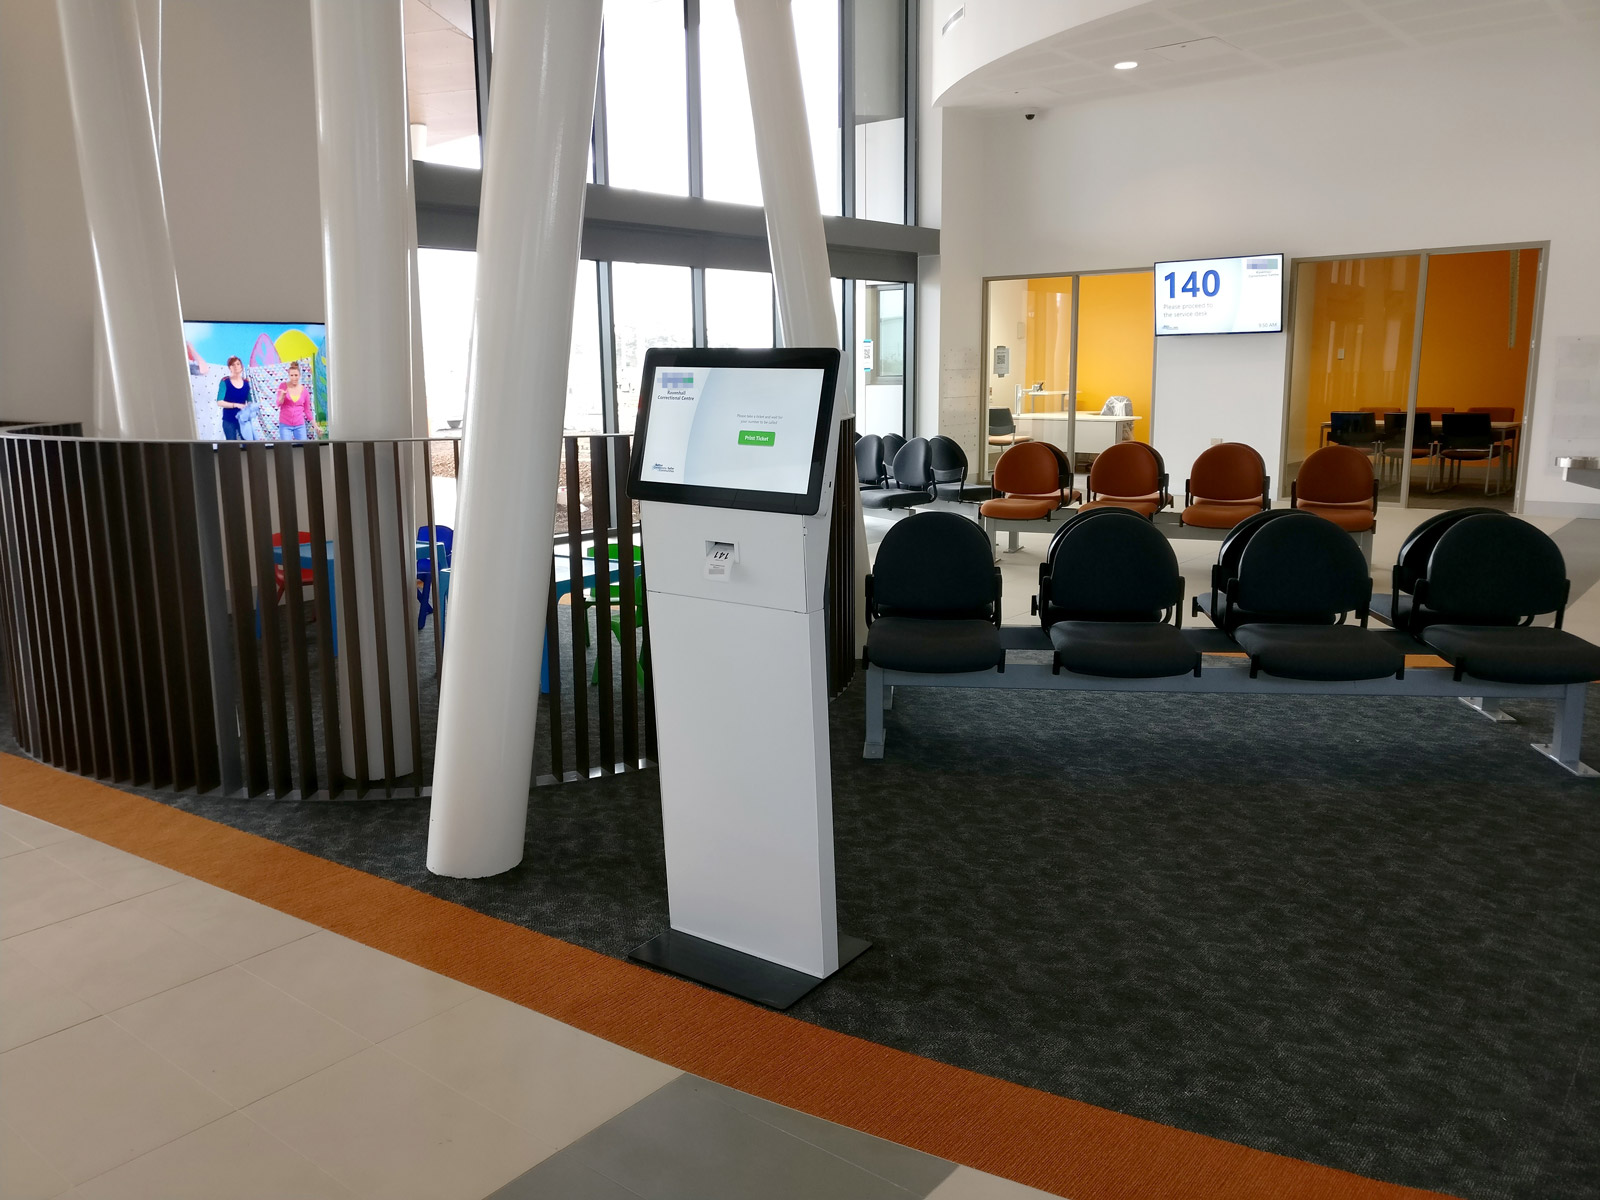 The visitor kiosk was deliberately left unbranded to better blend into the décor. Visitors collect their ticket and are directed to the waiting area. Photo courtesy Pro AV Solutions